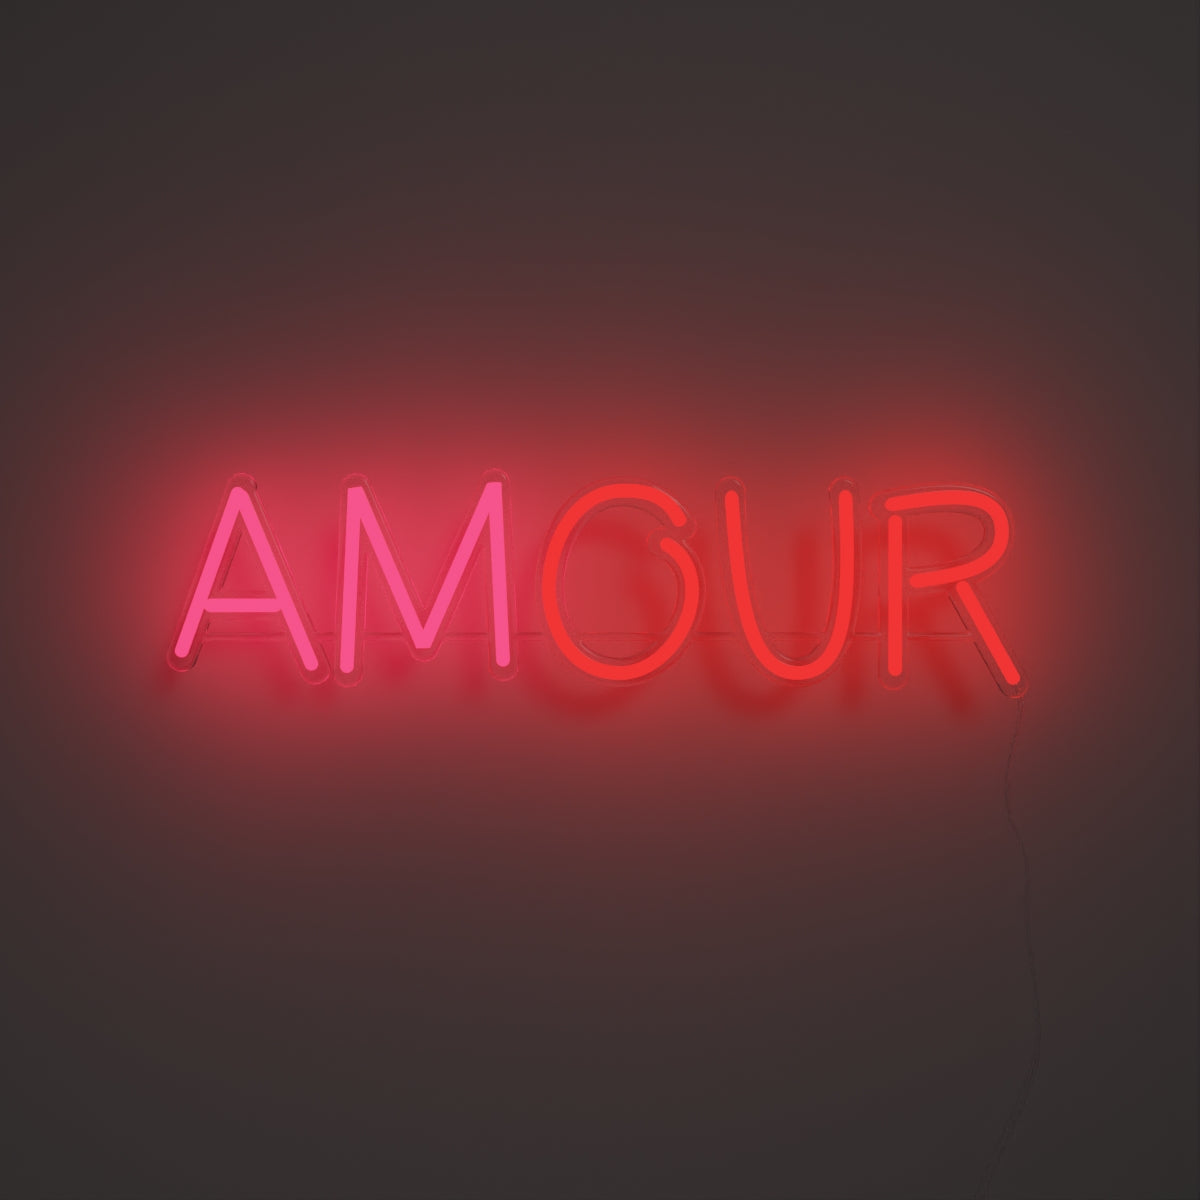 Our Amour, Neon Tabela - Neonbir